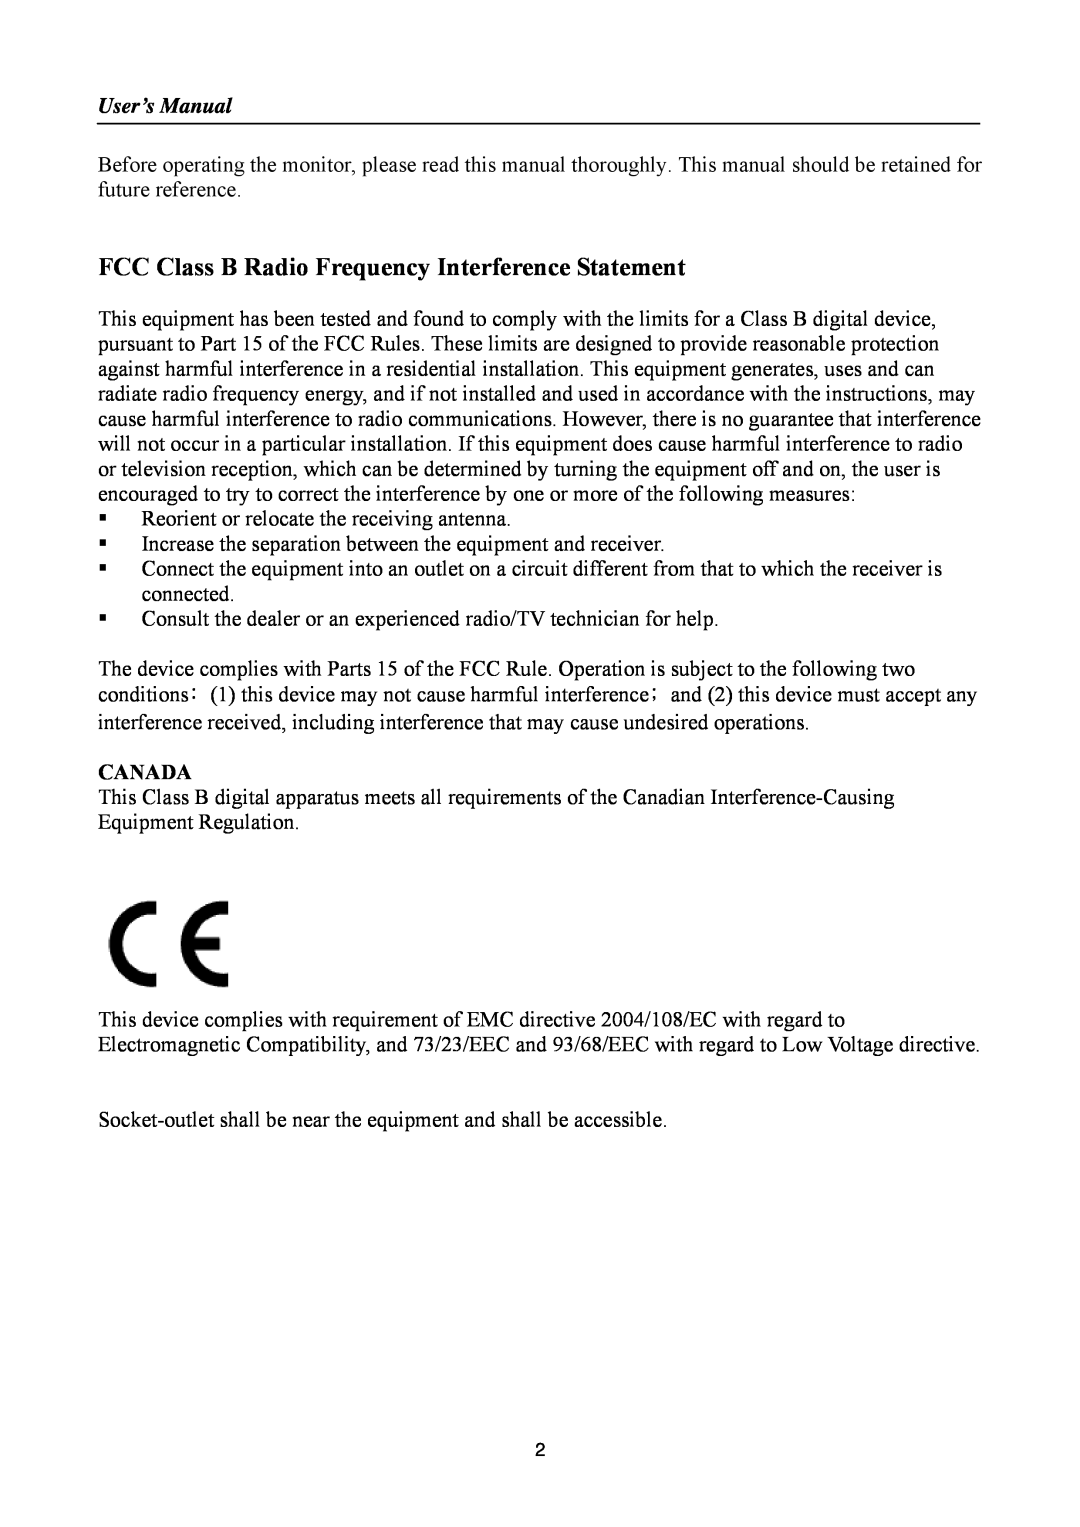 HANNspree HF257 manual FCC Class B Radio Frequency Interference Statement, User’s Manual, Canada 